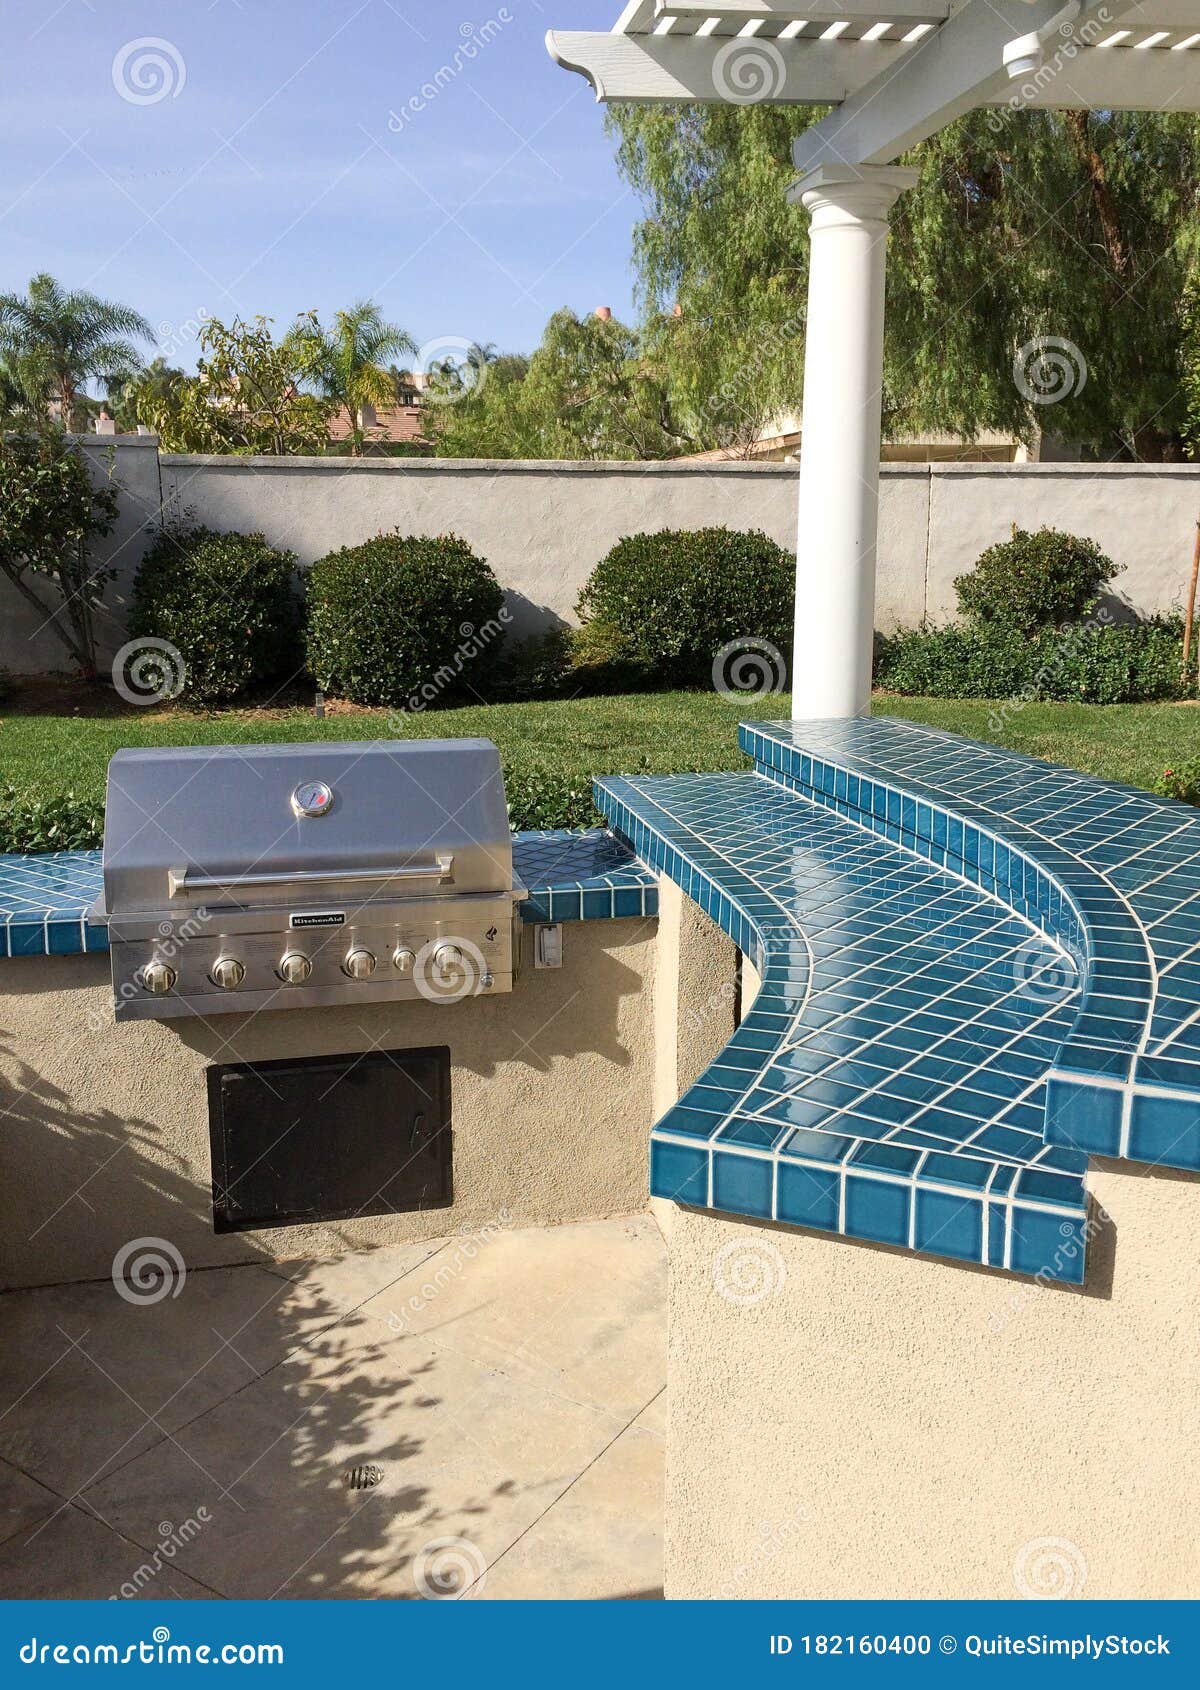 Backyard Bbq Barbecue Built In Design Stock Photo Image Of Meal Outdoor 182160400